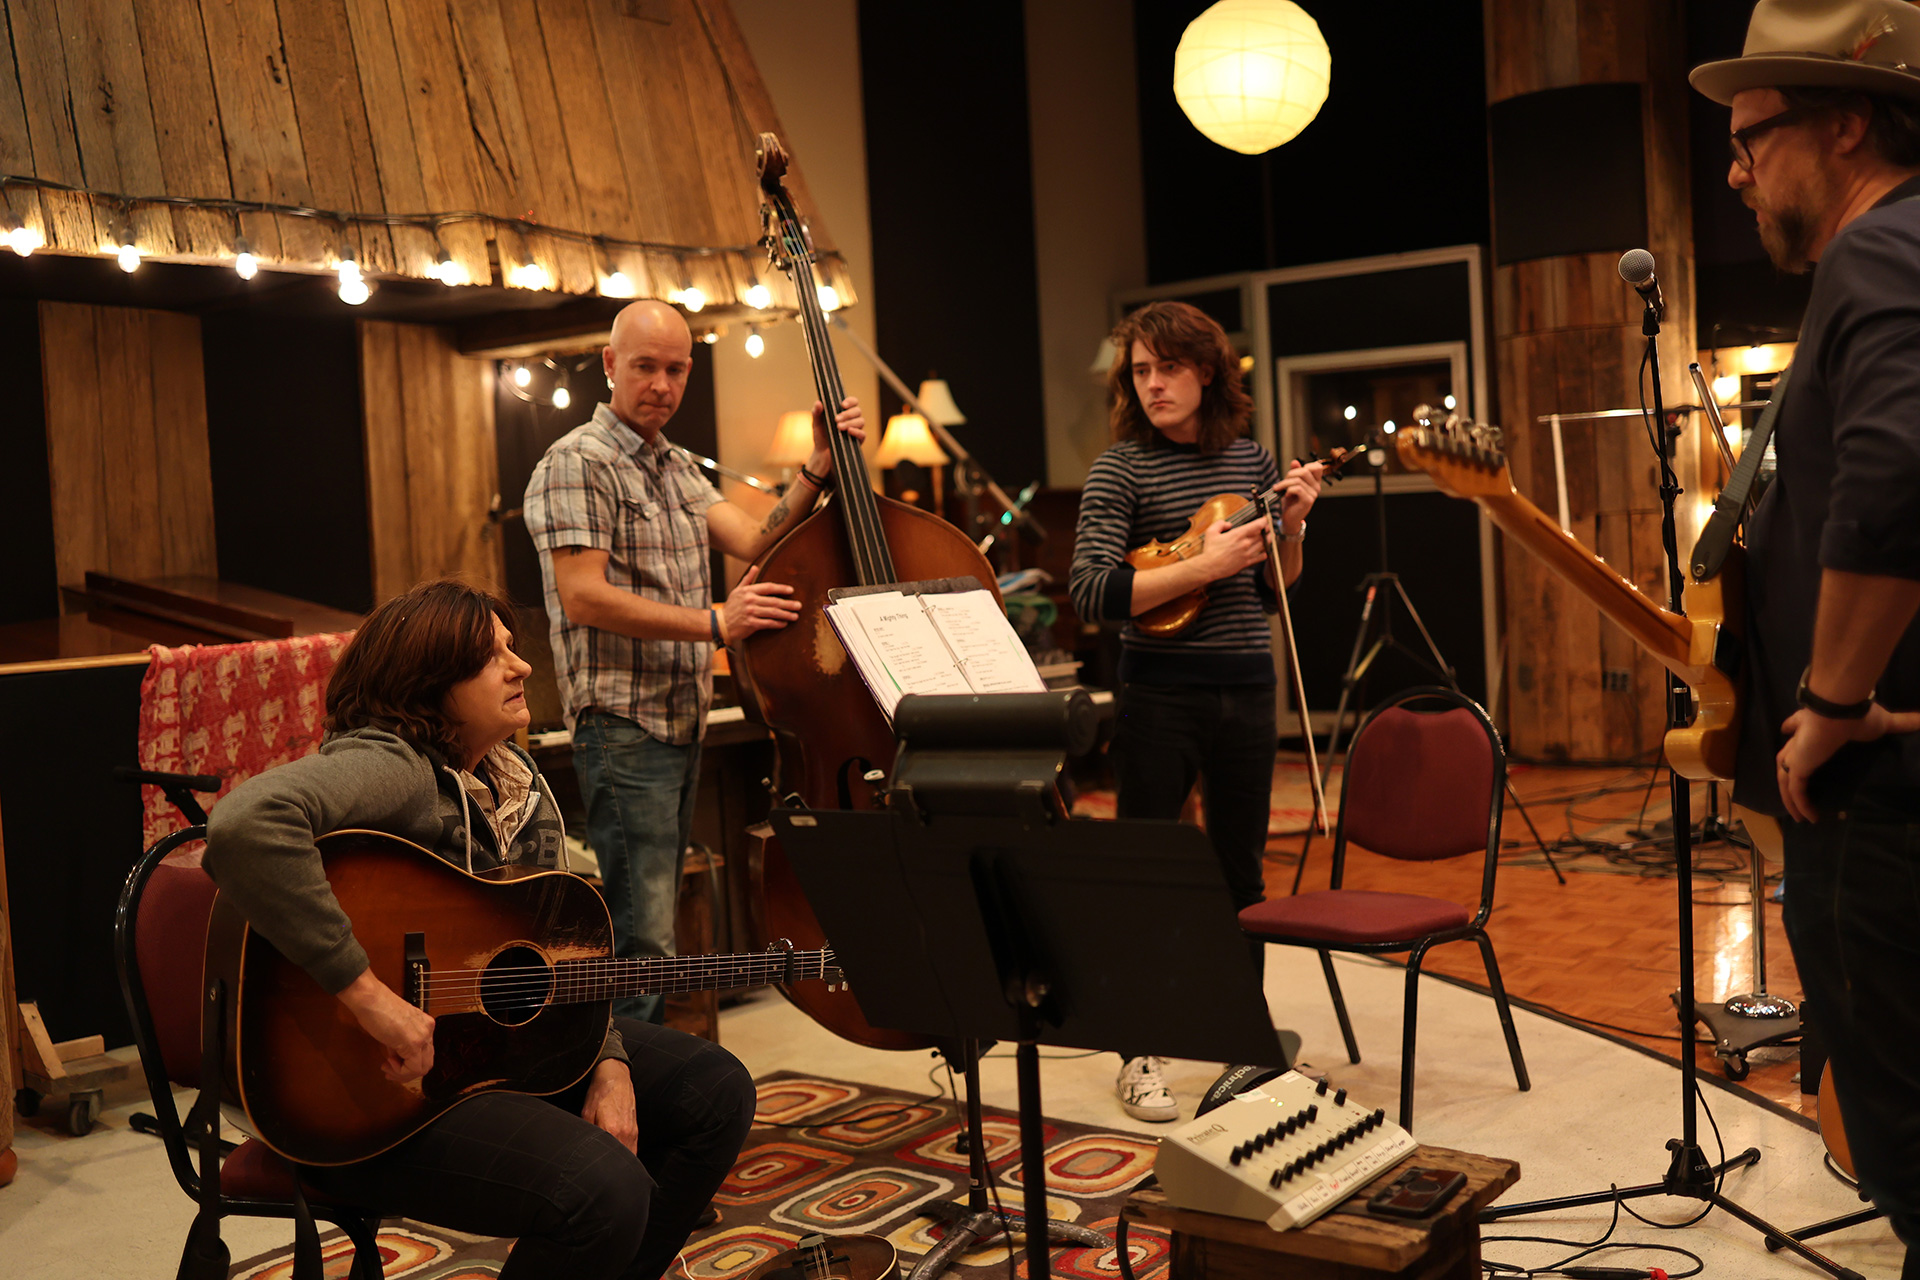 Amy Ray with bandmates Kerry Brooks, Adrian Carter and Jeff Fielder recording "If It All Goes South" at the Sound Emporium in Nashville. (Photograph by Jordan Hamlin)